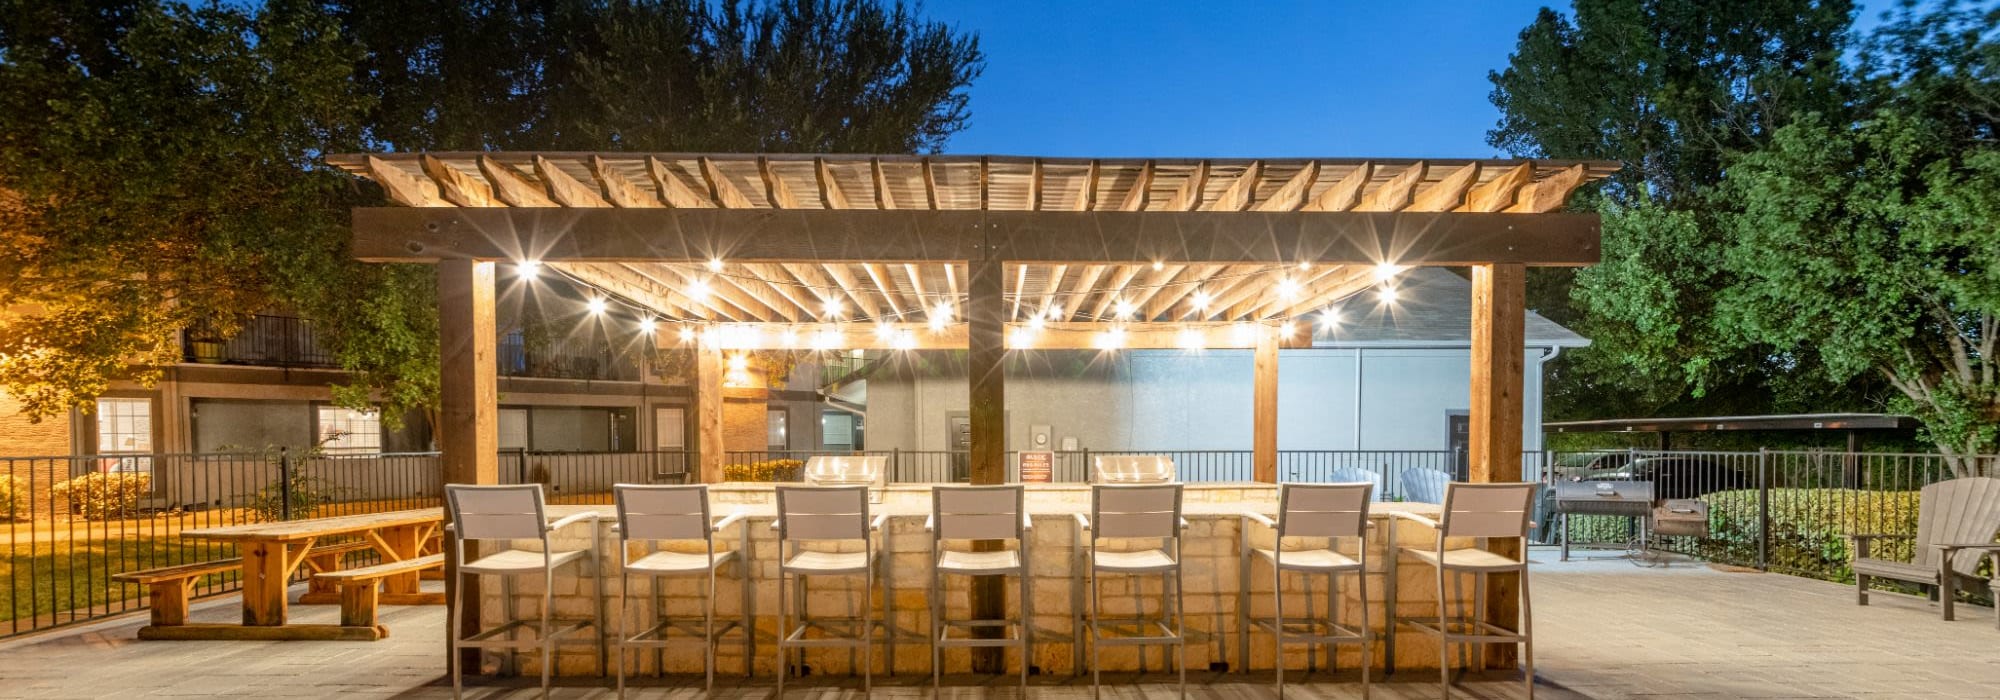 Outdoor grill station with picnic table at The Rustic of McKinney in McKinney, Texas